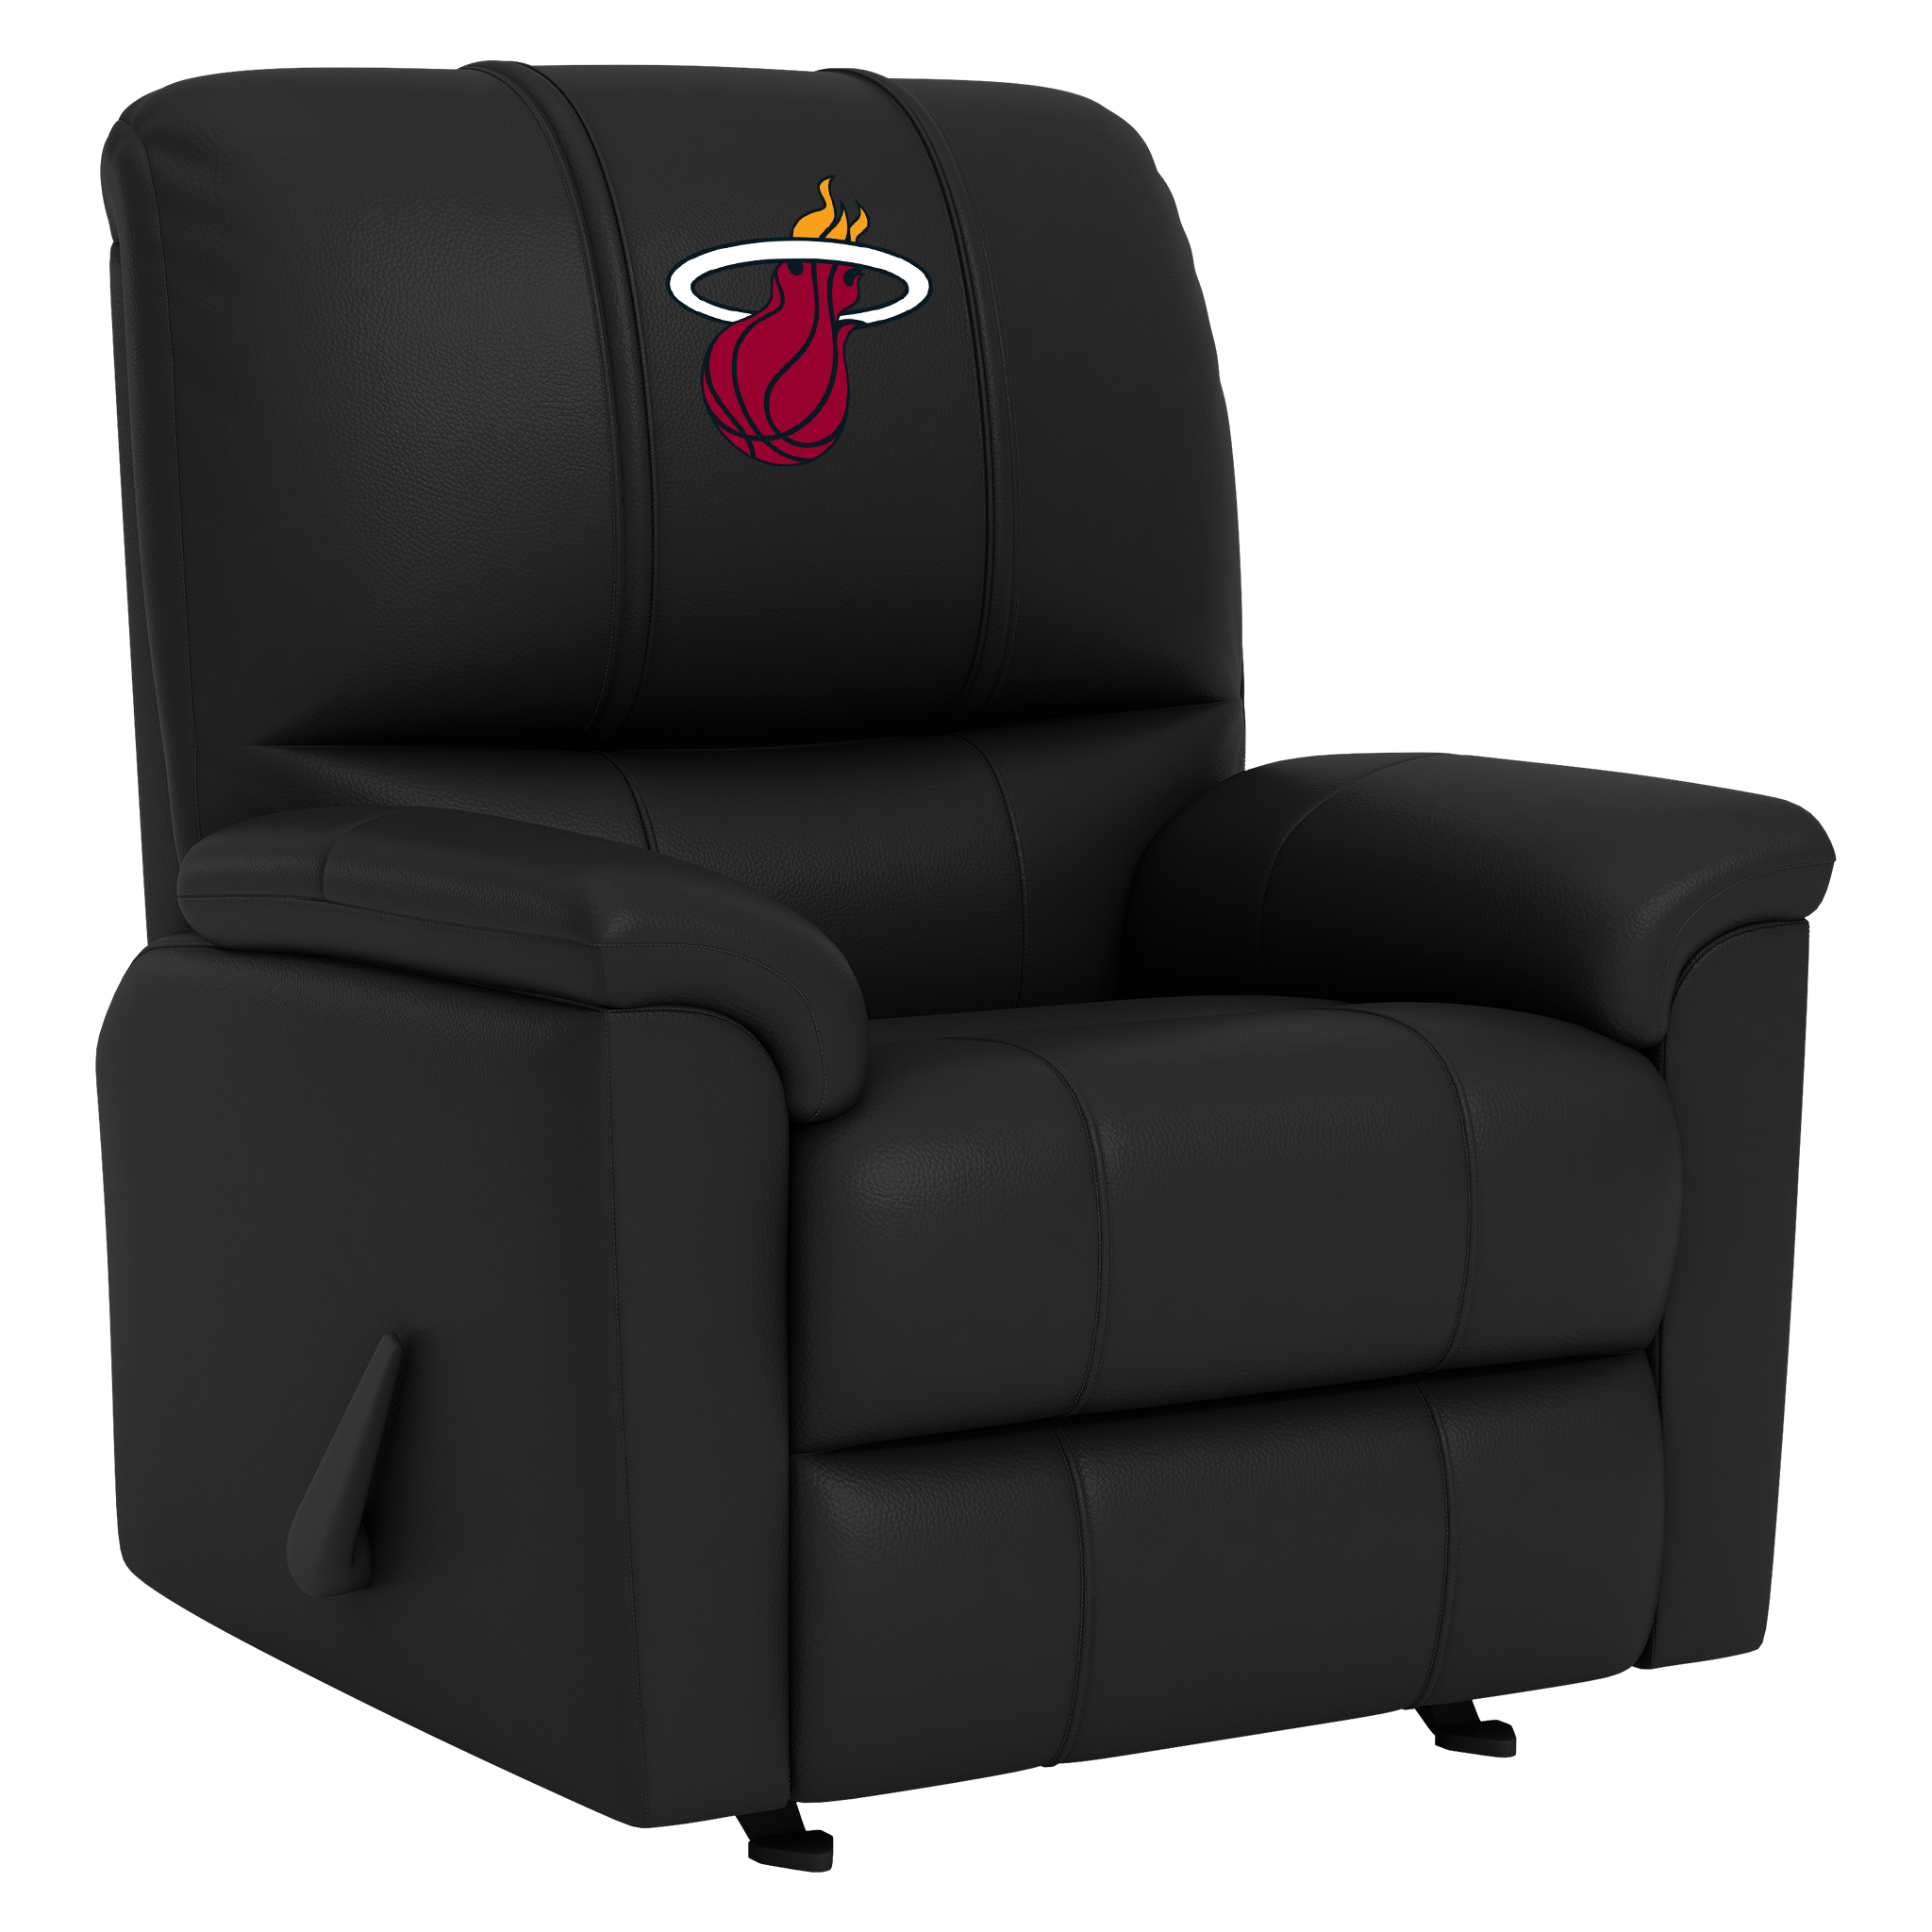 Golden State Warriors Silver Club Chair with Golden State Warriors Secondary Logo